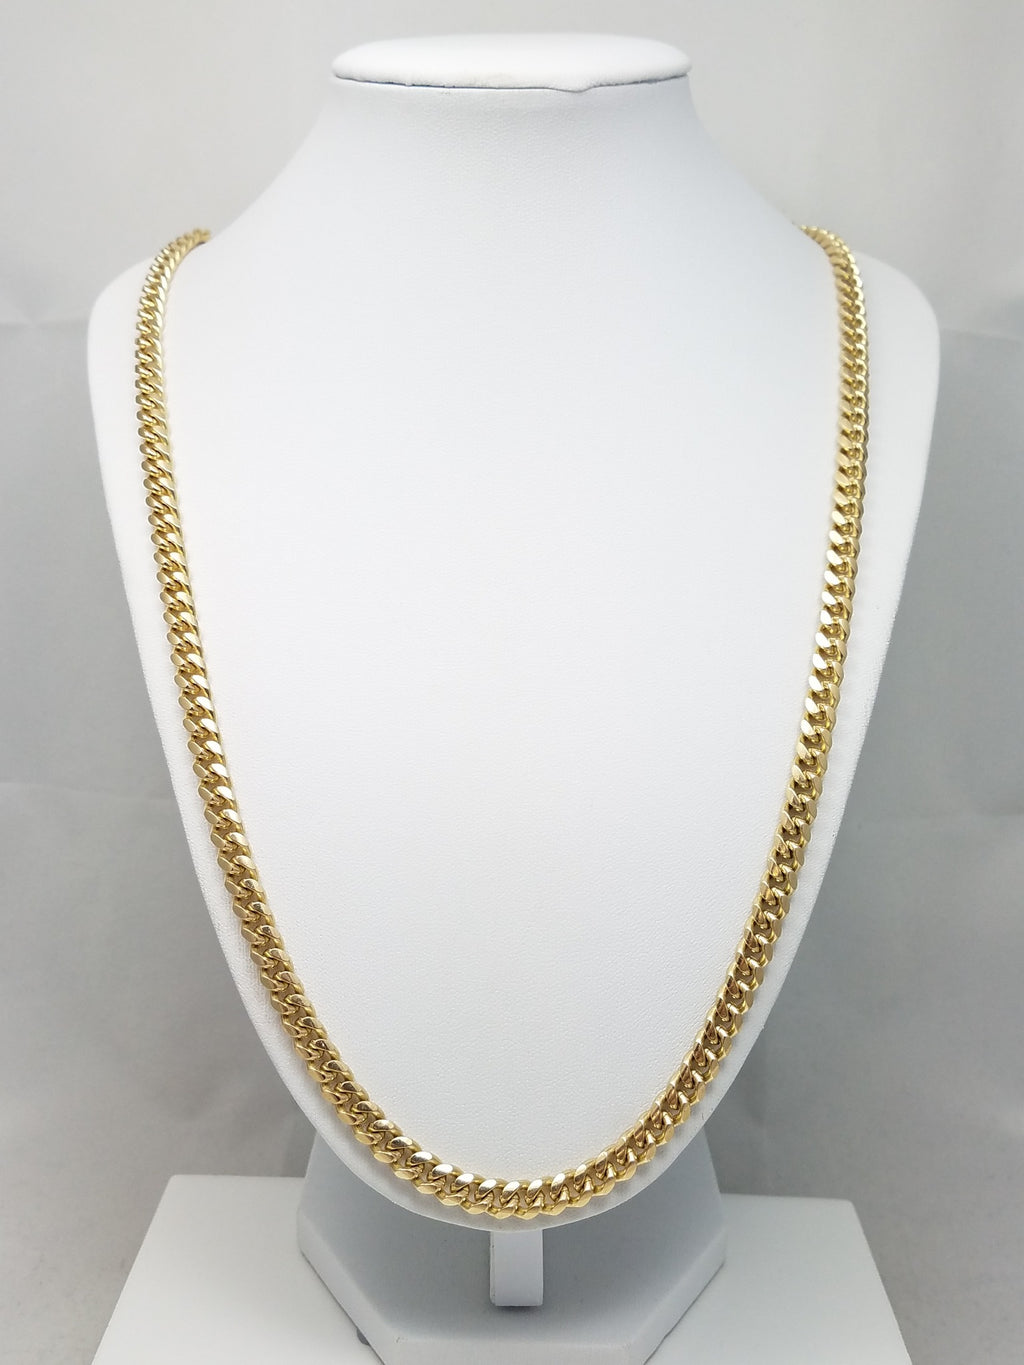 26" 14k Solid Yellow Gold Cuban Chain Necklace